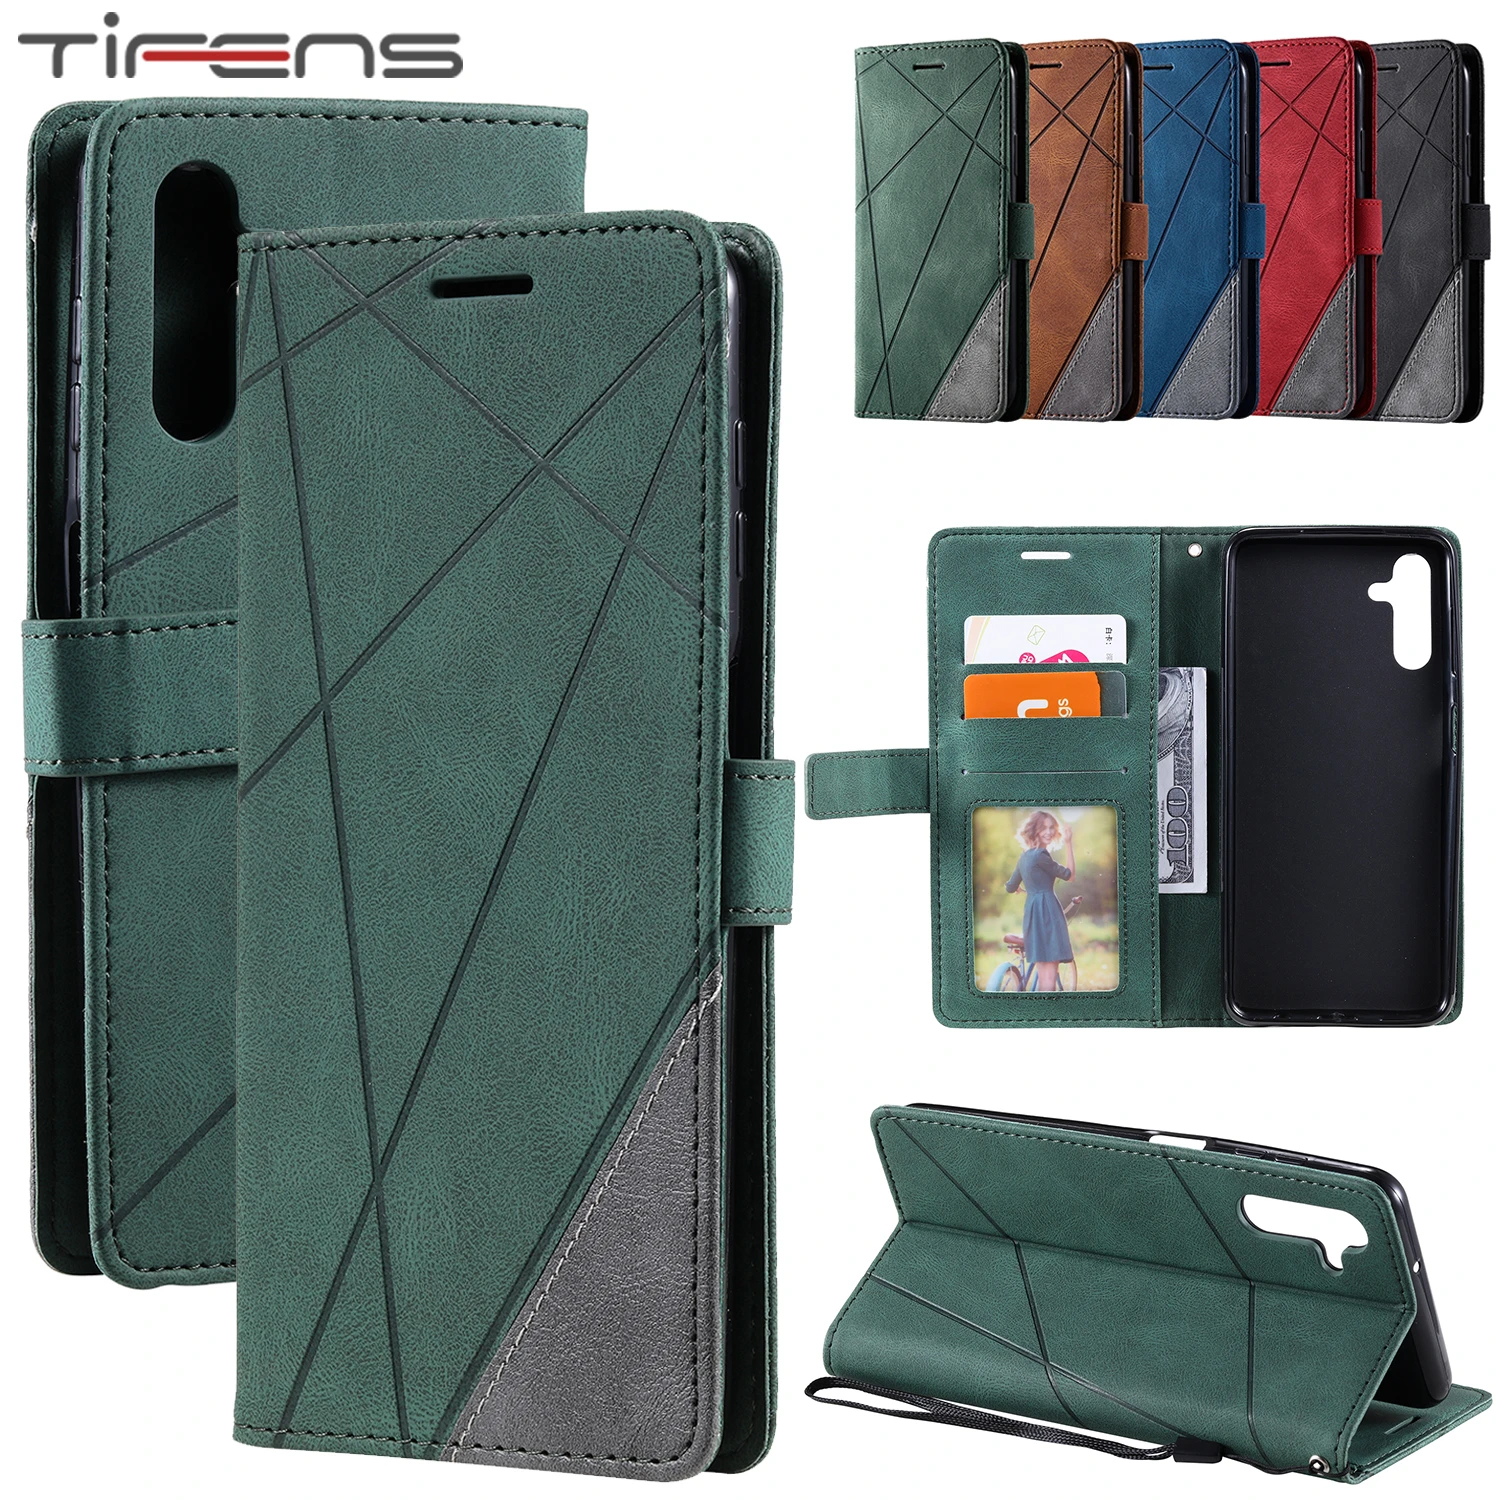 Leather Case For Samsung Galaxy S20FE A52 A72 A51 A71 A02S A42 A32 A01 A12 A21 A31 A41 A50 A70 A20 E A10 S A40 Flip Wallet Cover